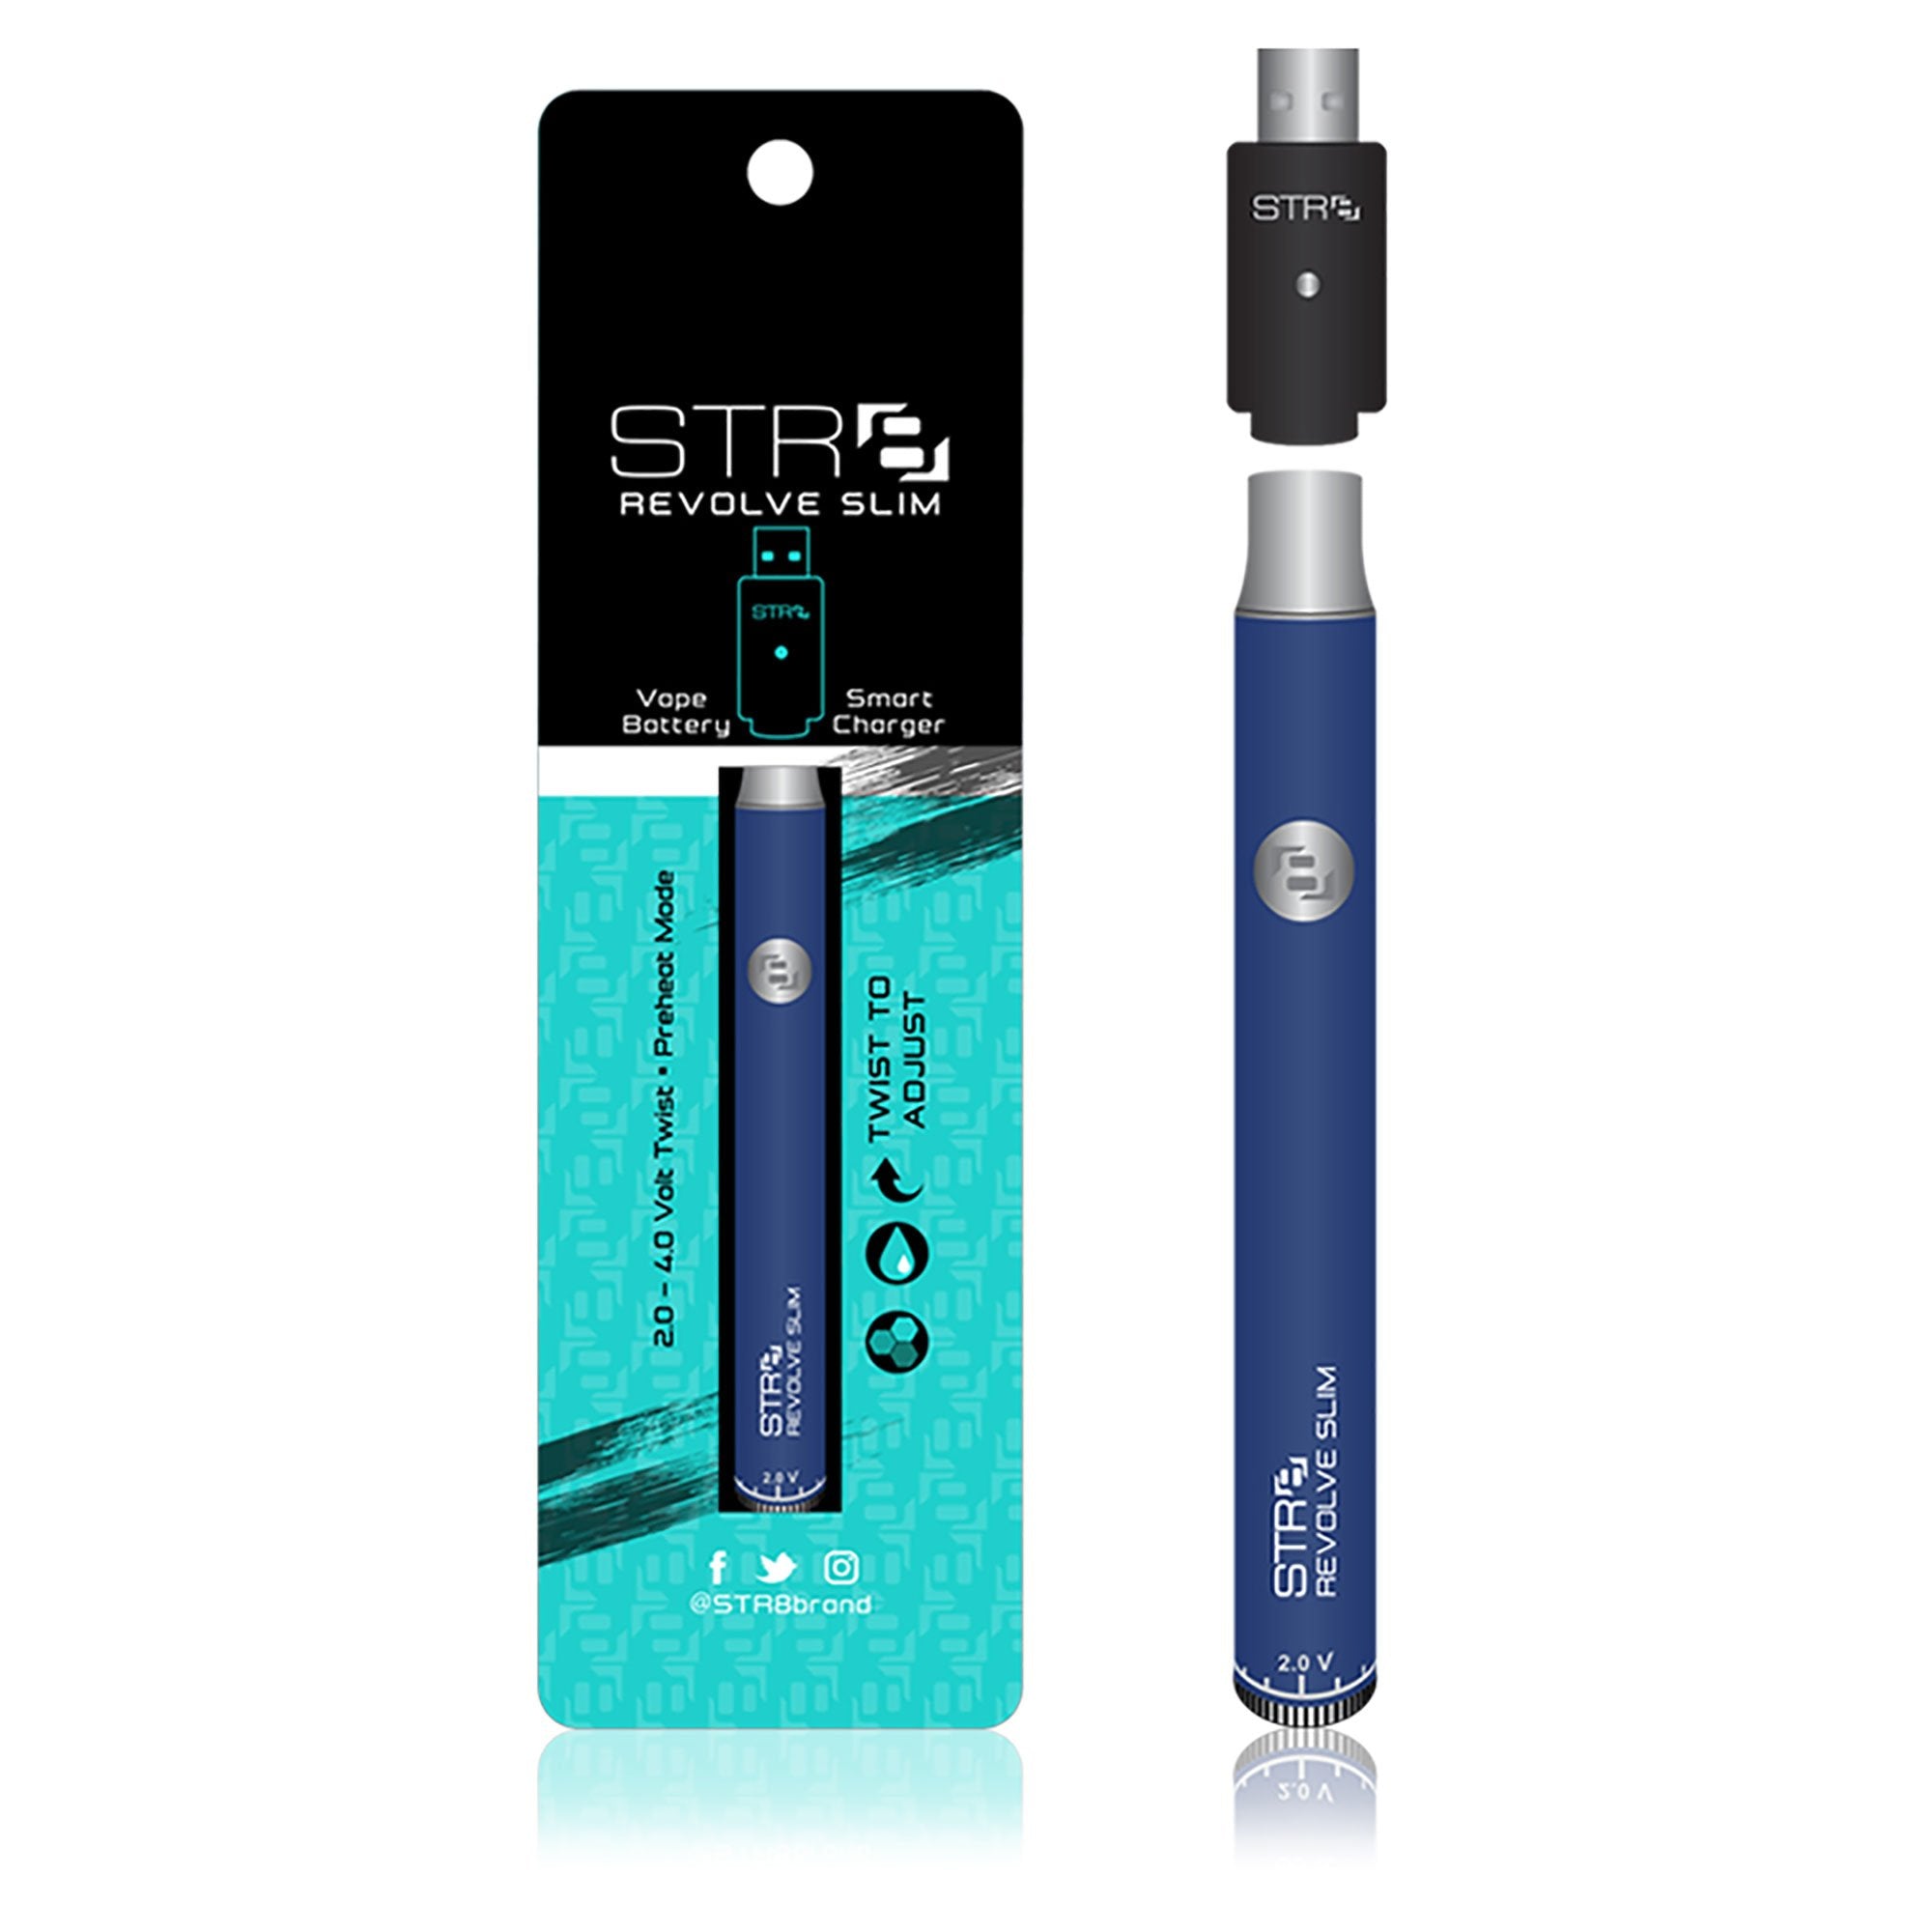 STR8 | Slim Revolve Battery w/ Charger | 320mAh - Blue - 5 Count - 1